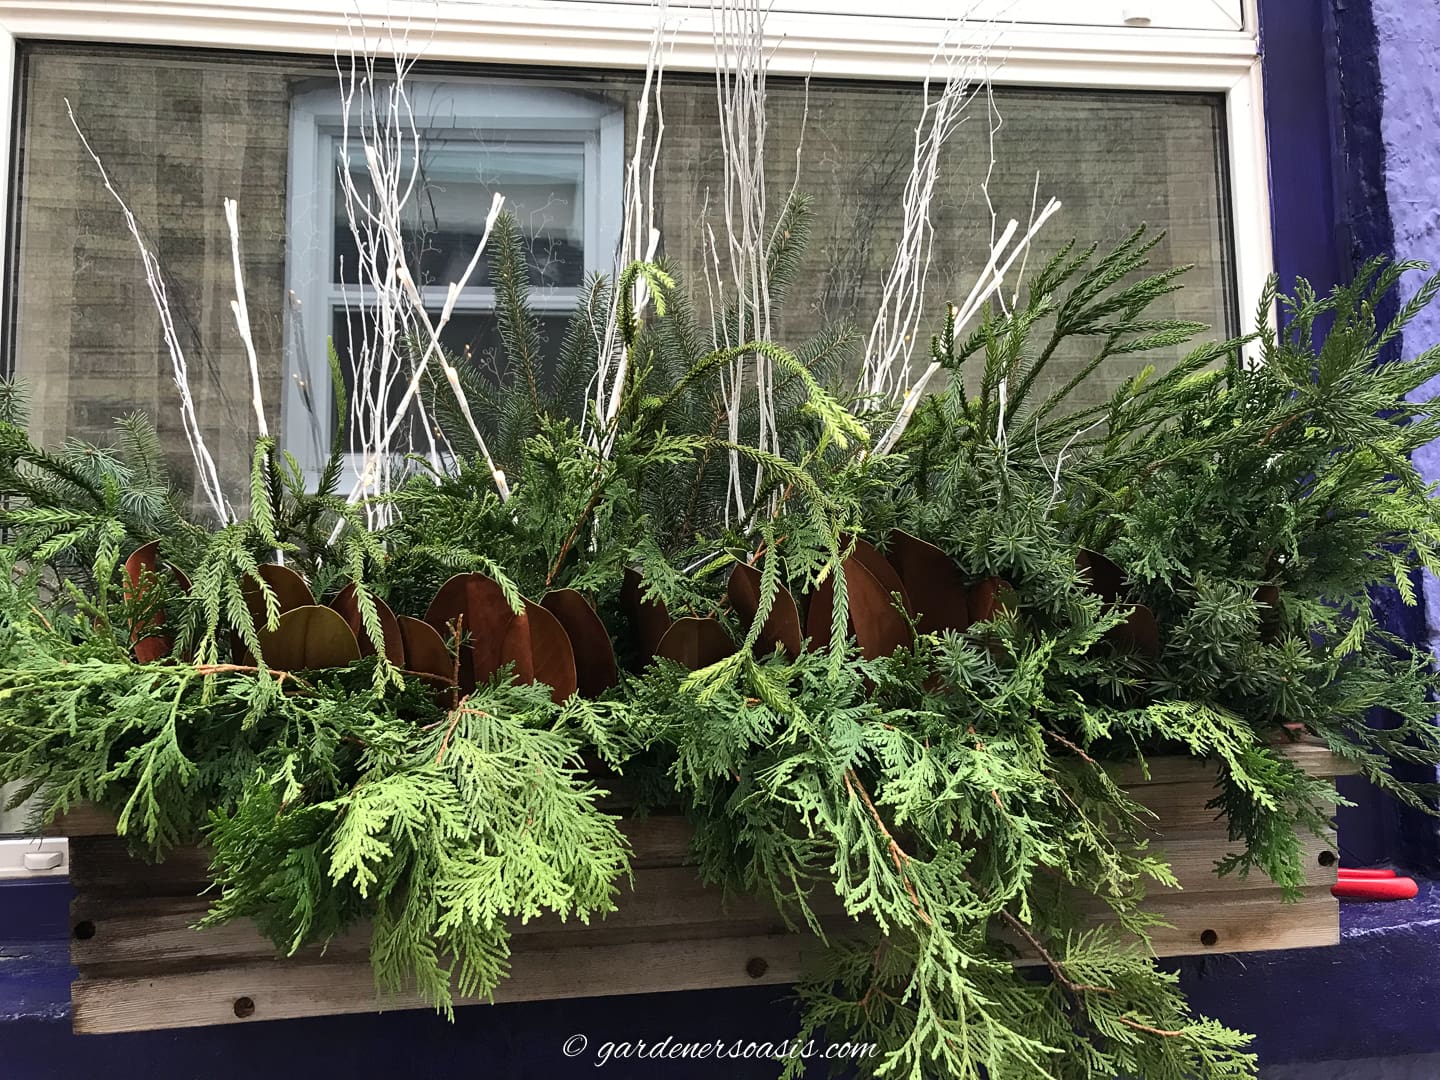 A winter-themed window box filled with evergreens and twigs.